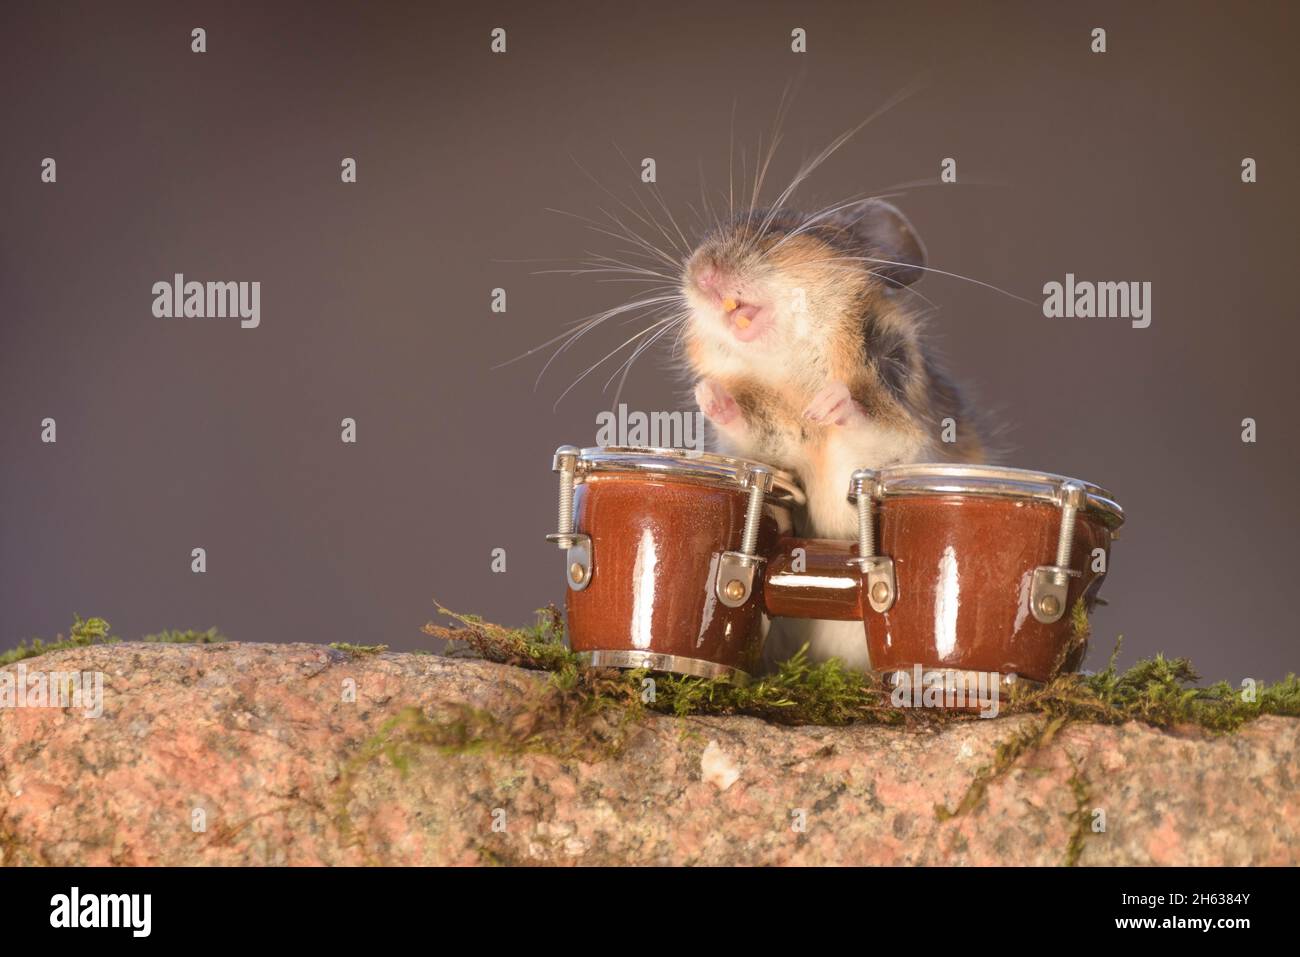 mouse with open mouth holding bongo drums Stock Photo